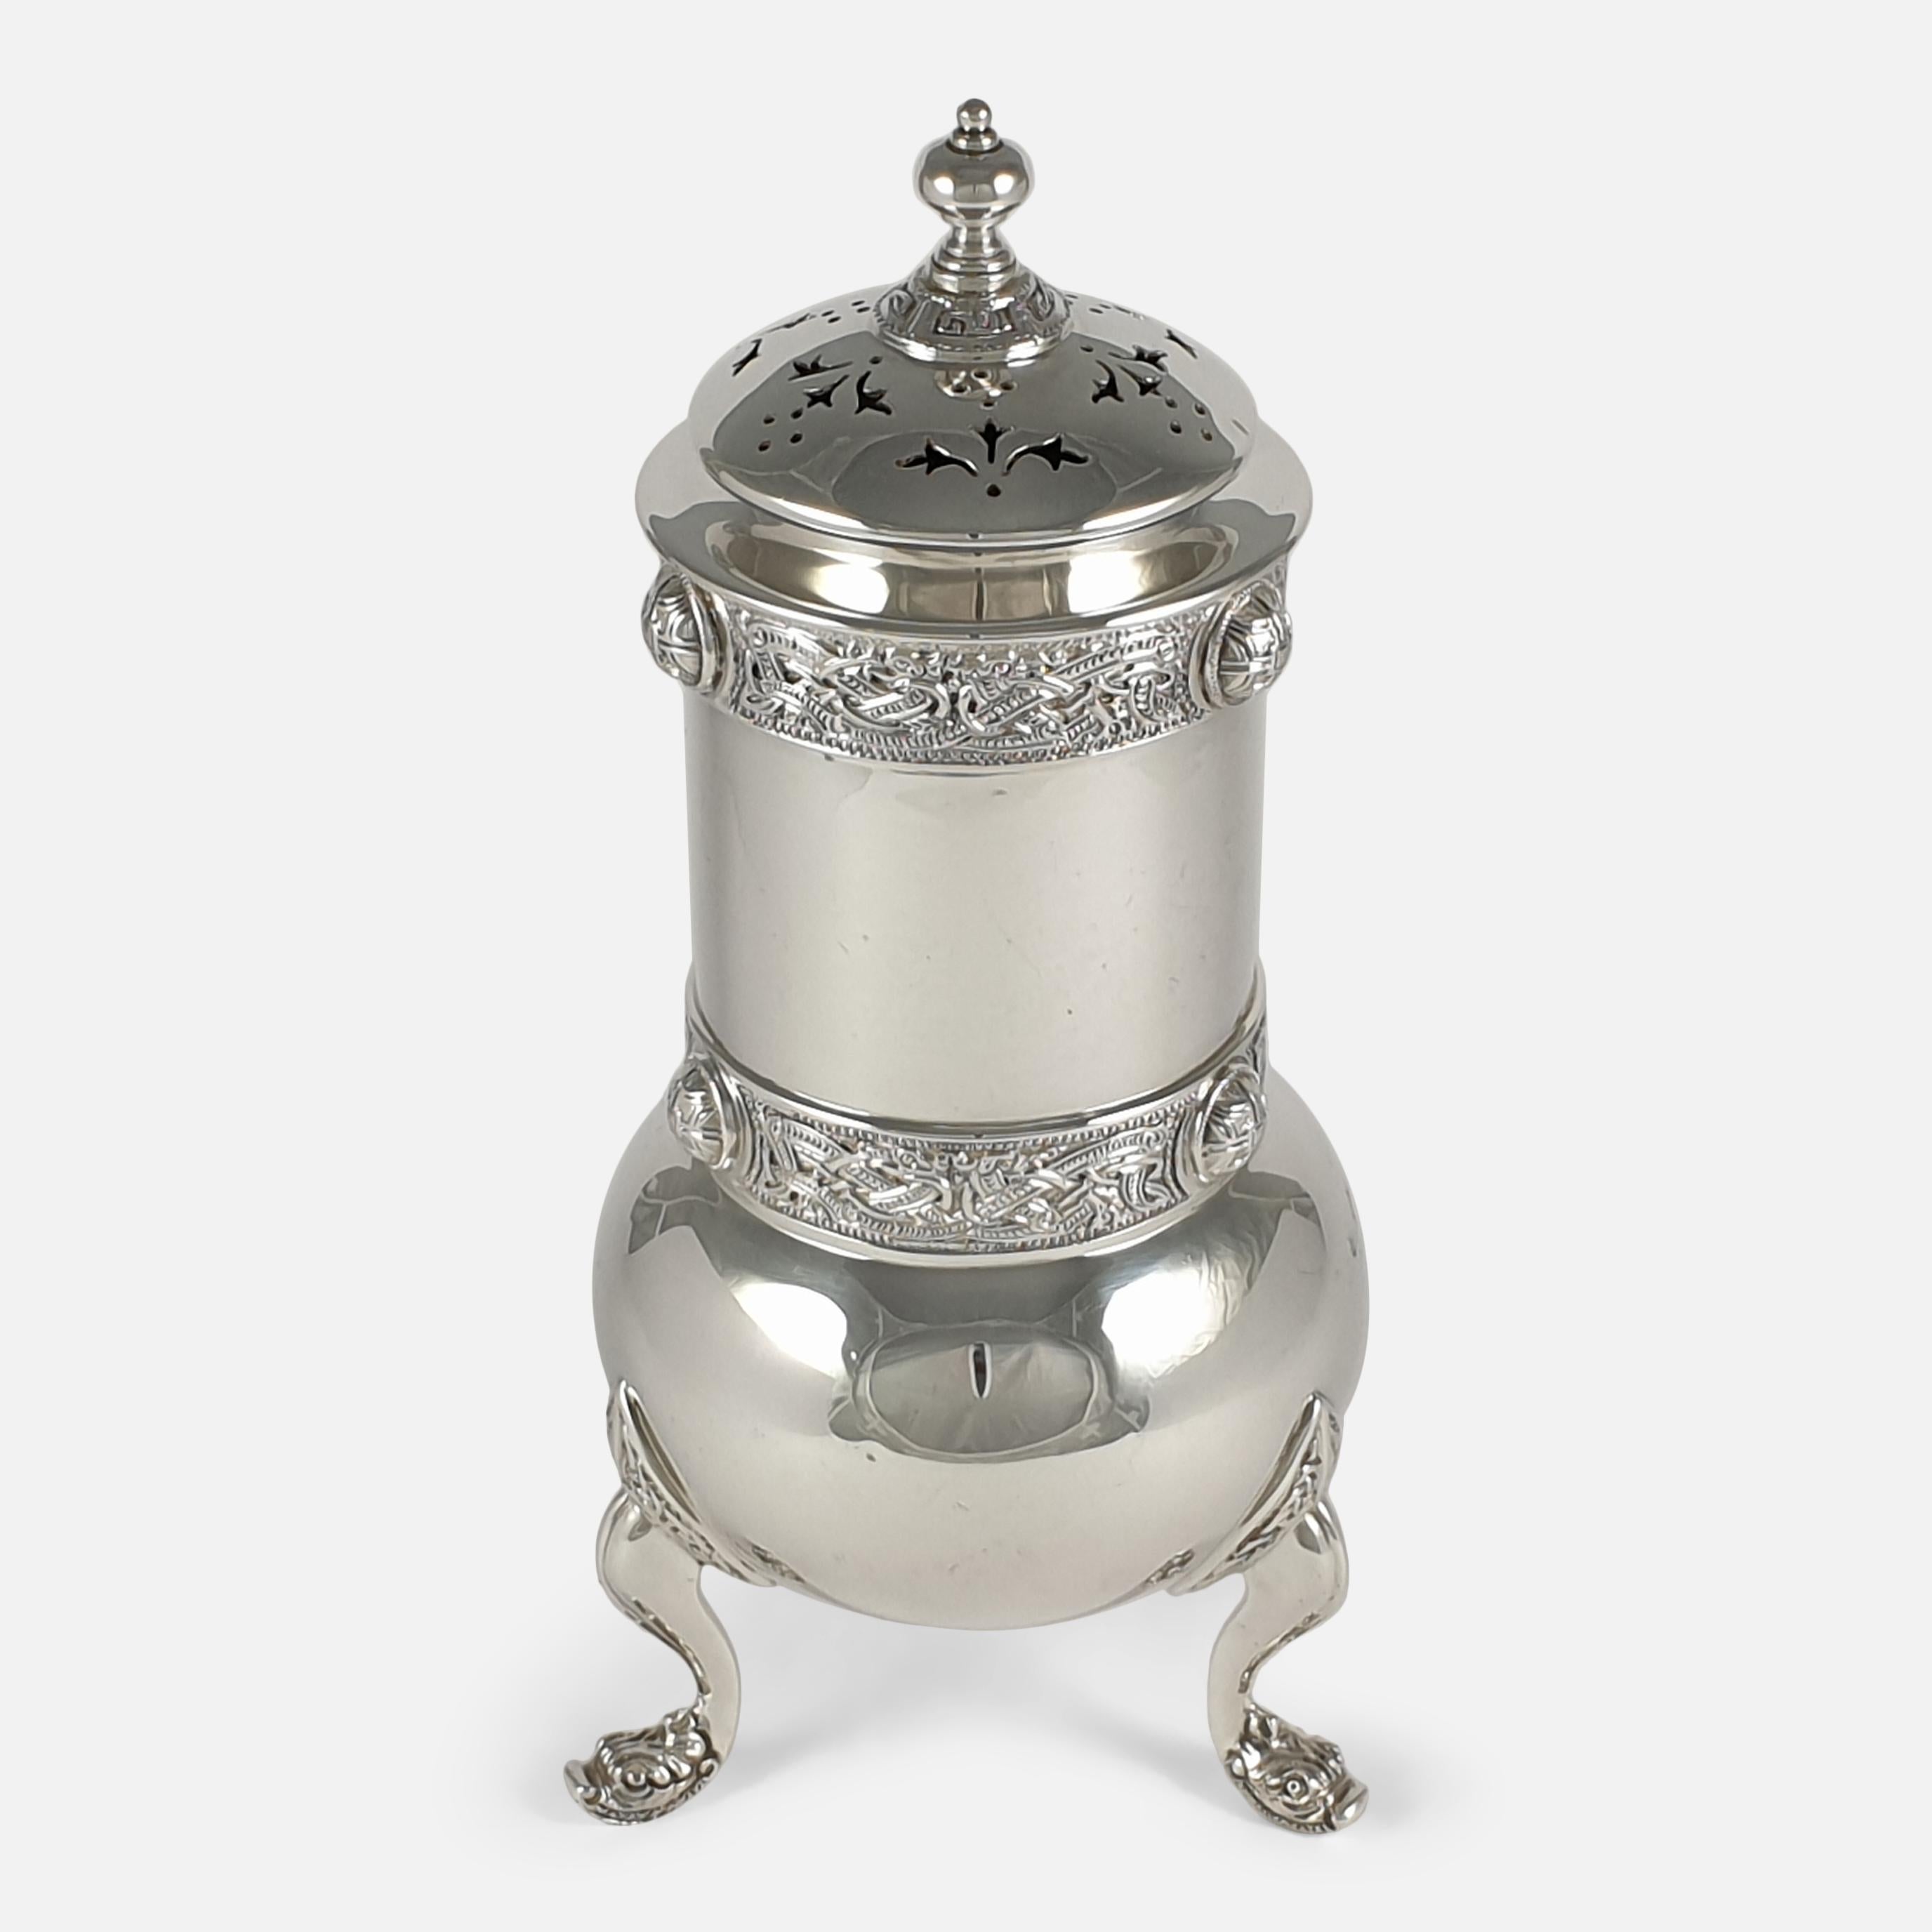 An antique Irish sterling silver sugar caster. The sugar caster is of cylindrical form with a pierced domed cover and knop finial, Celtic strap work decoration to the body, and feet modelled as stylized beasts' heads. 

It is Irish hallmarked with